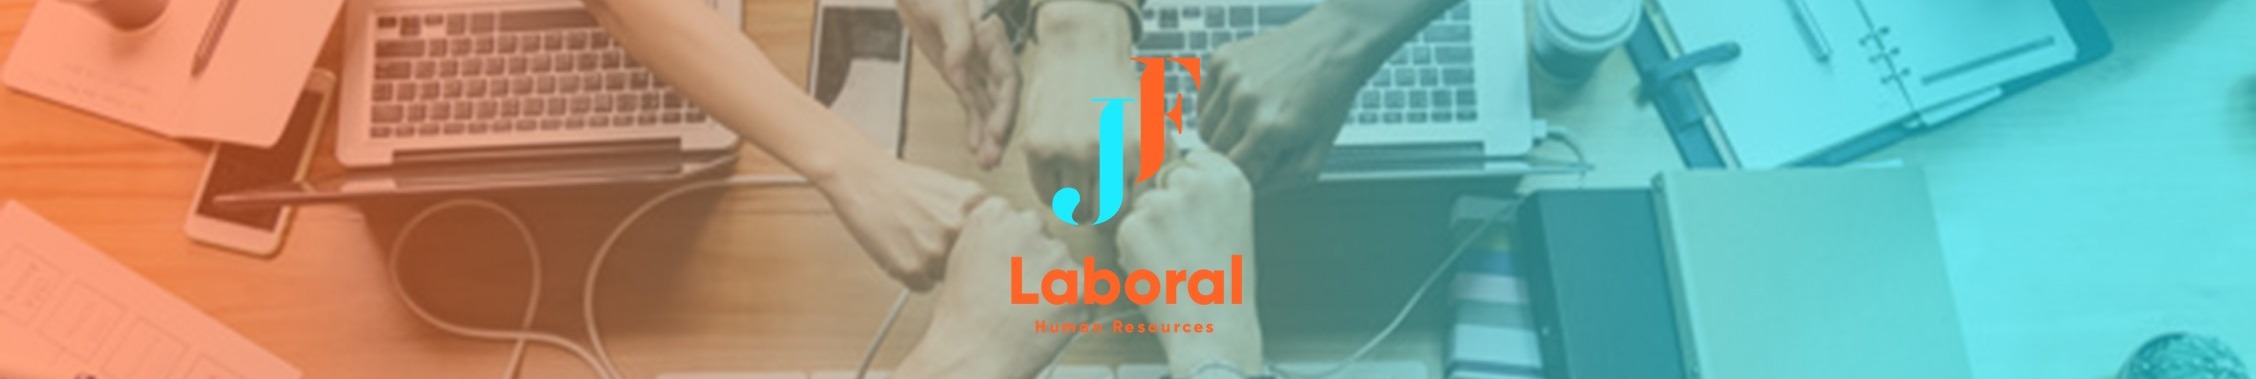 JF Laboral background